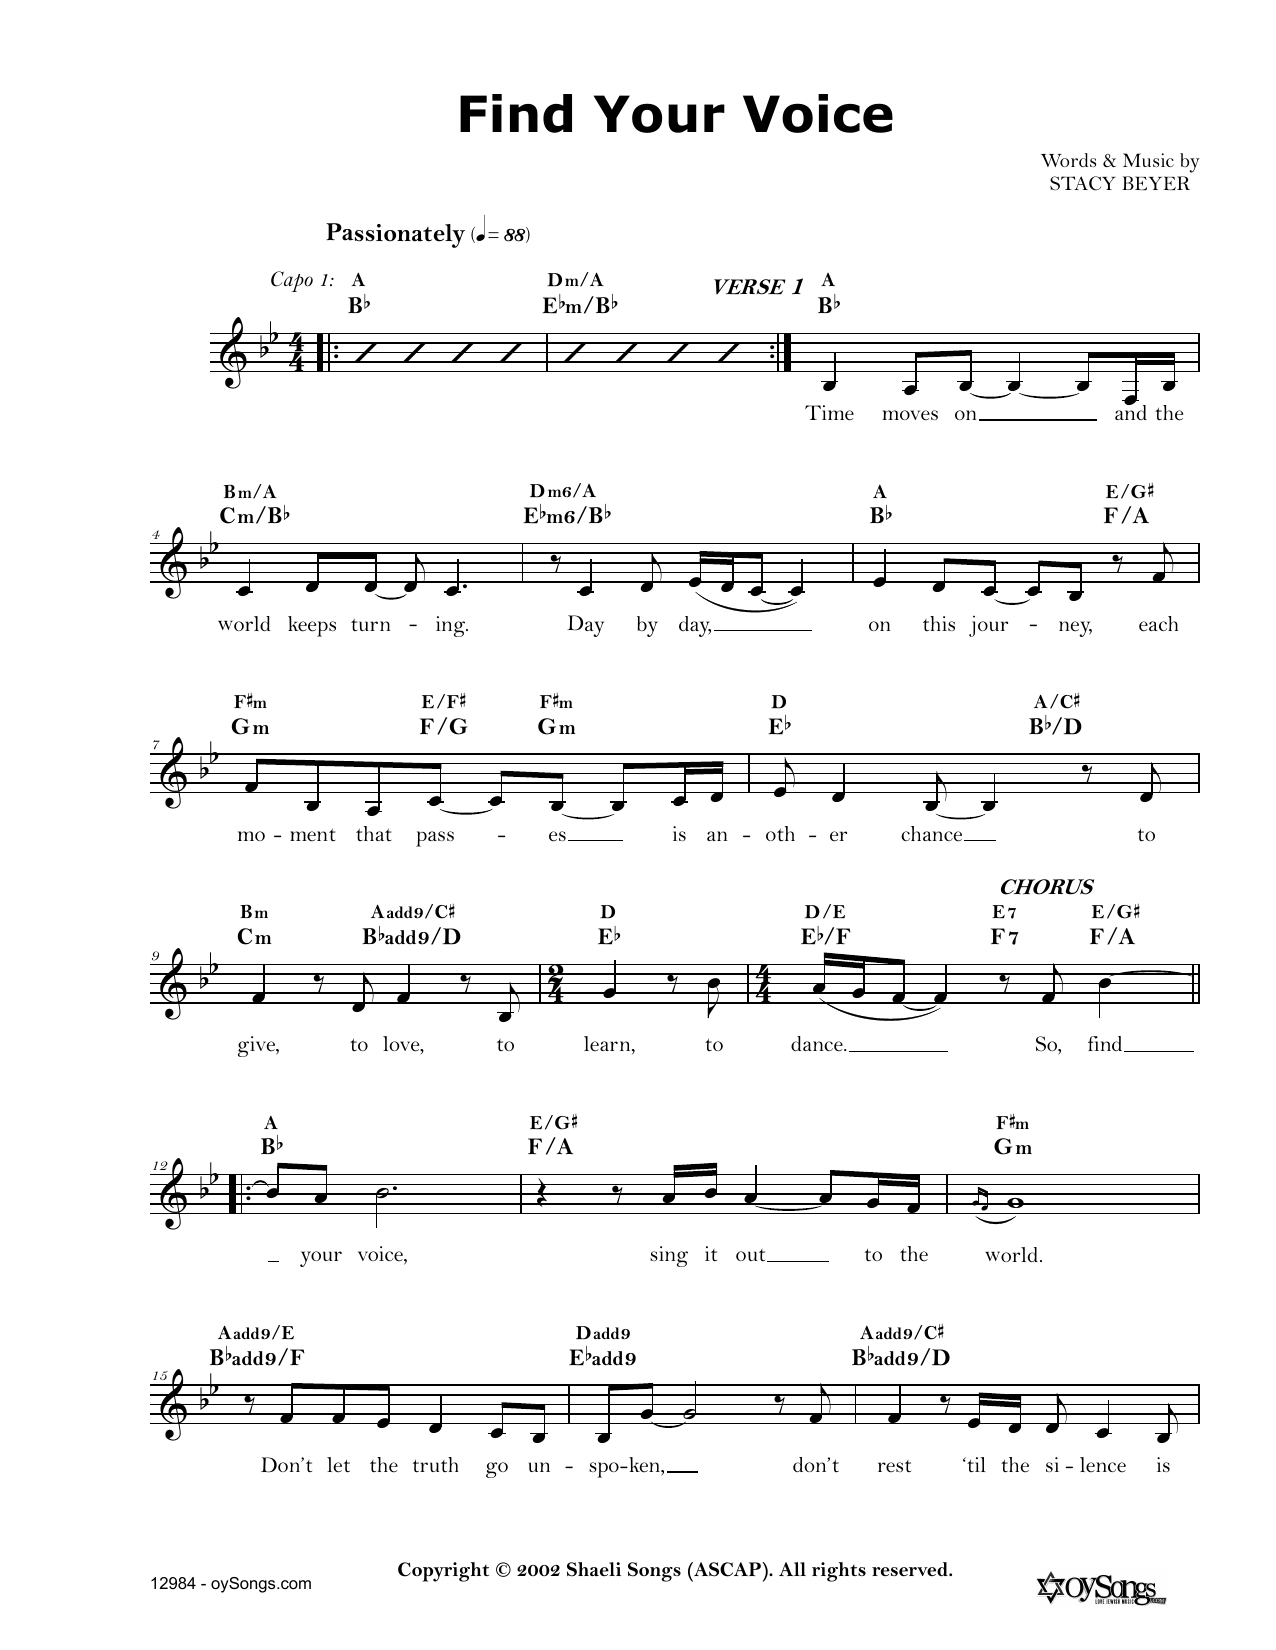 Download Stacy Beyer Find Your Voice Sheet Music